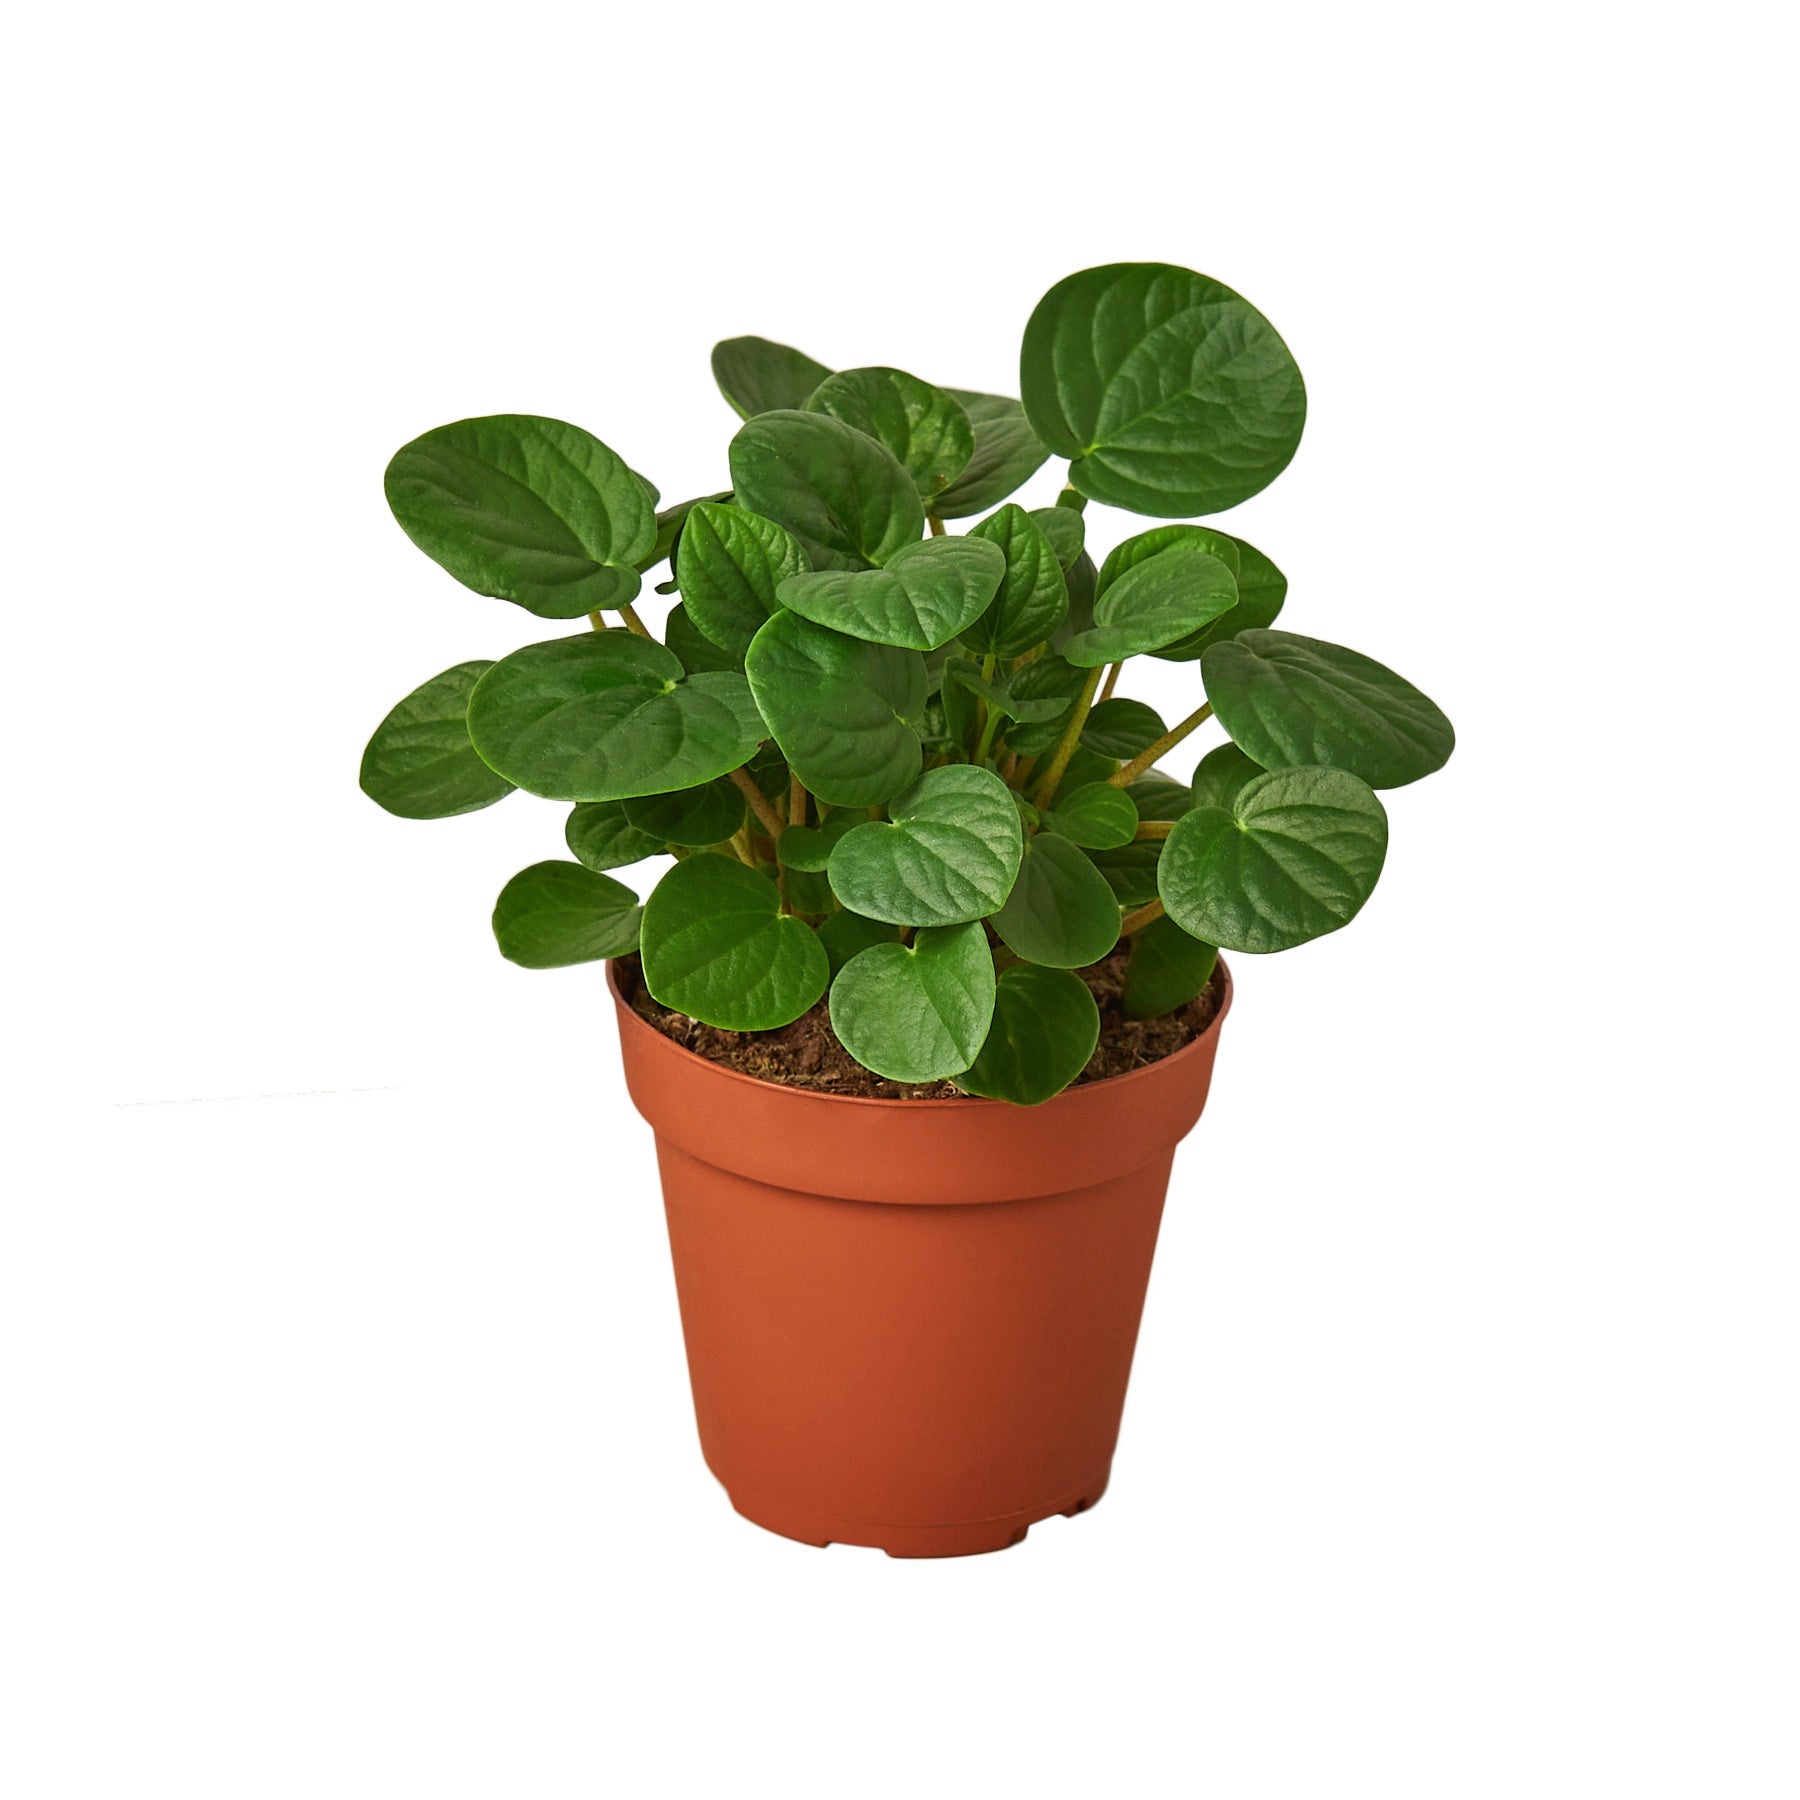 A small plant in a pot on a white background at a garden center near me.